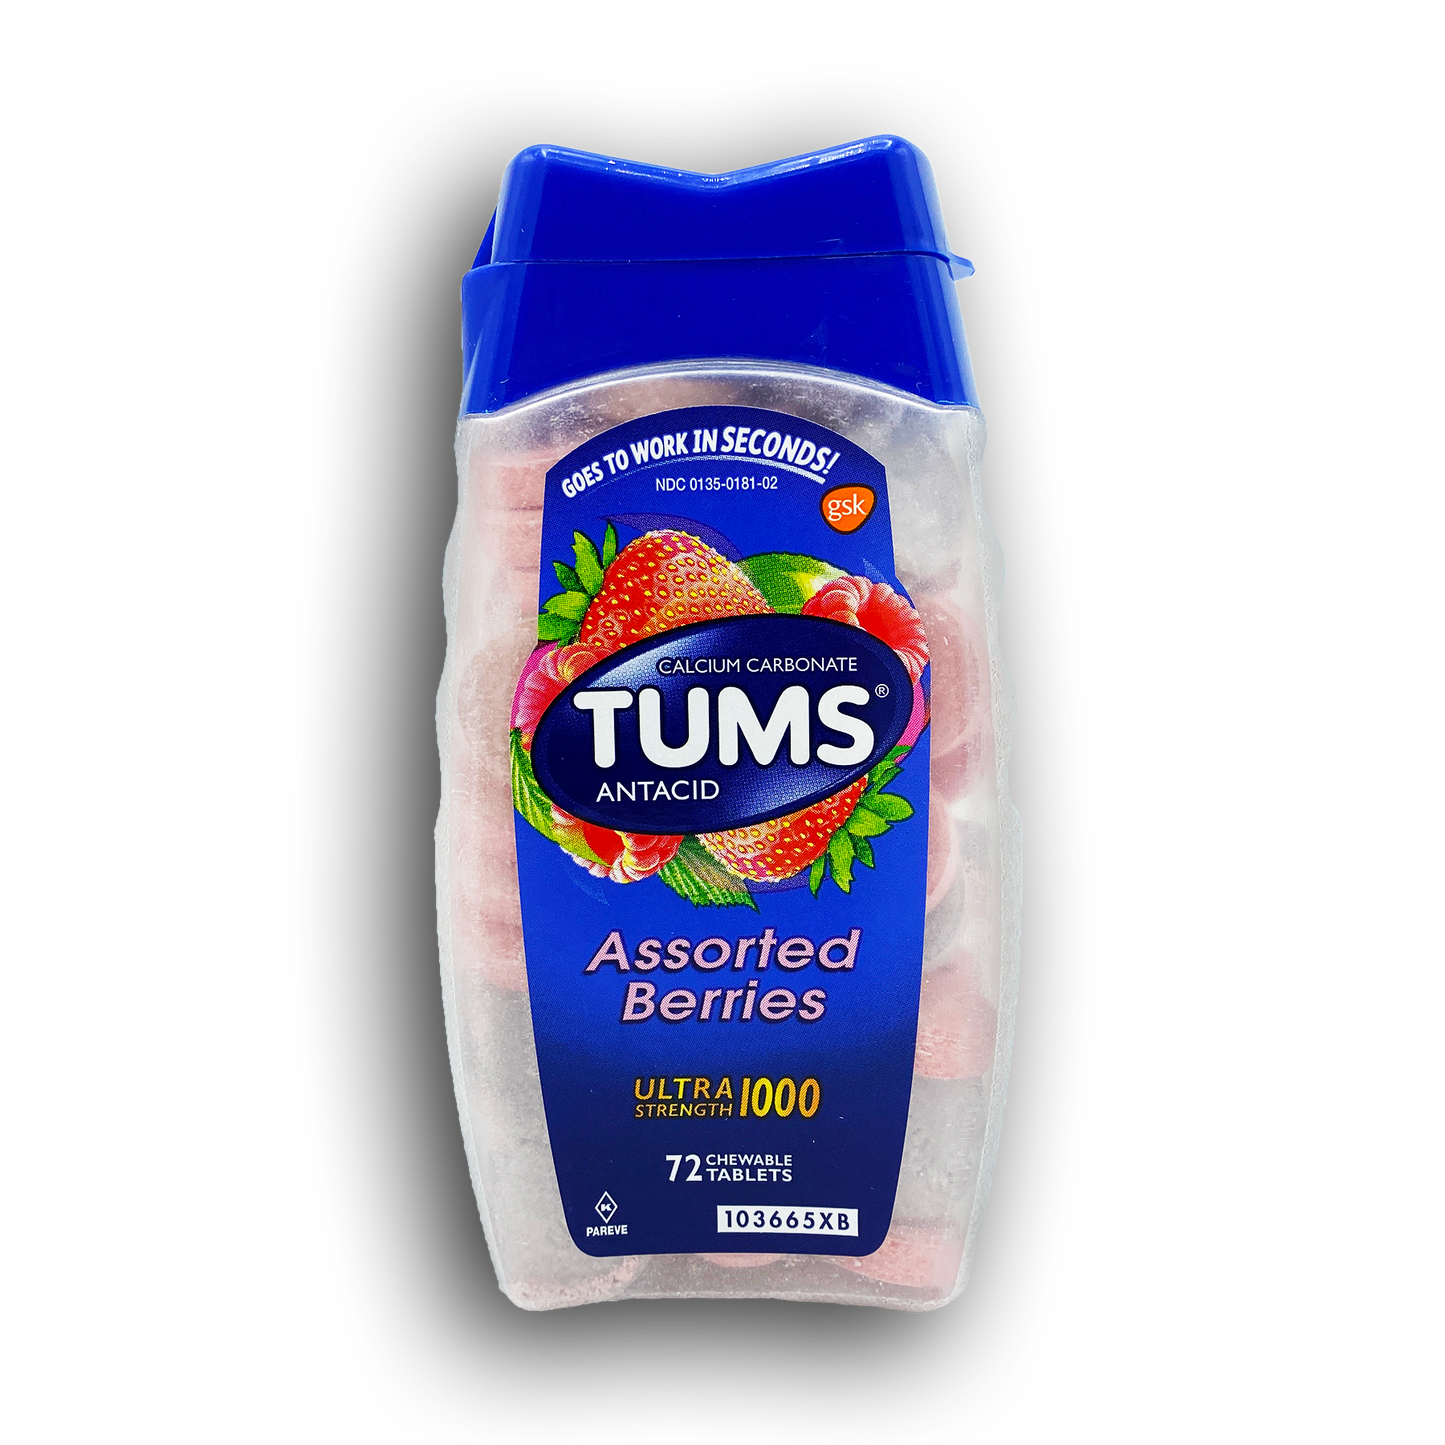 72PC TUMS ULTRA STRENGTH 1000 ASSORTED BERRIES